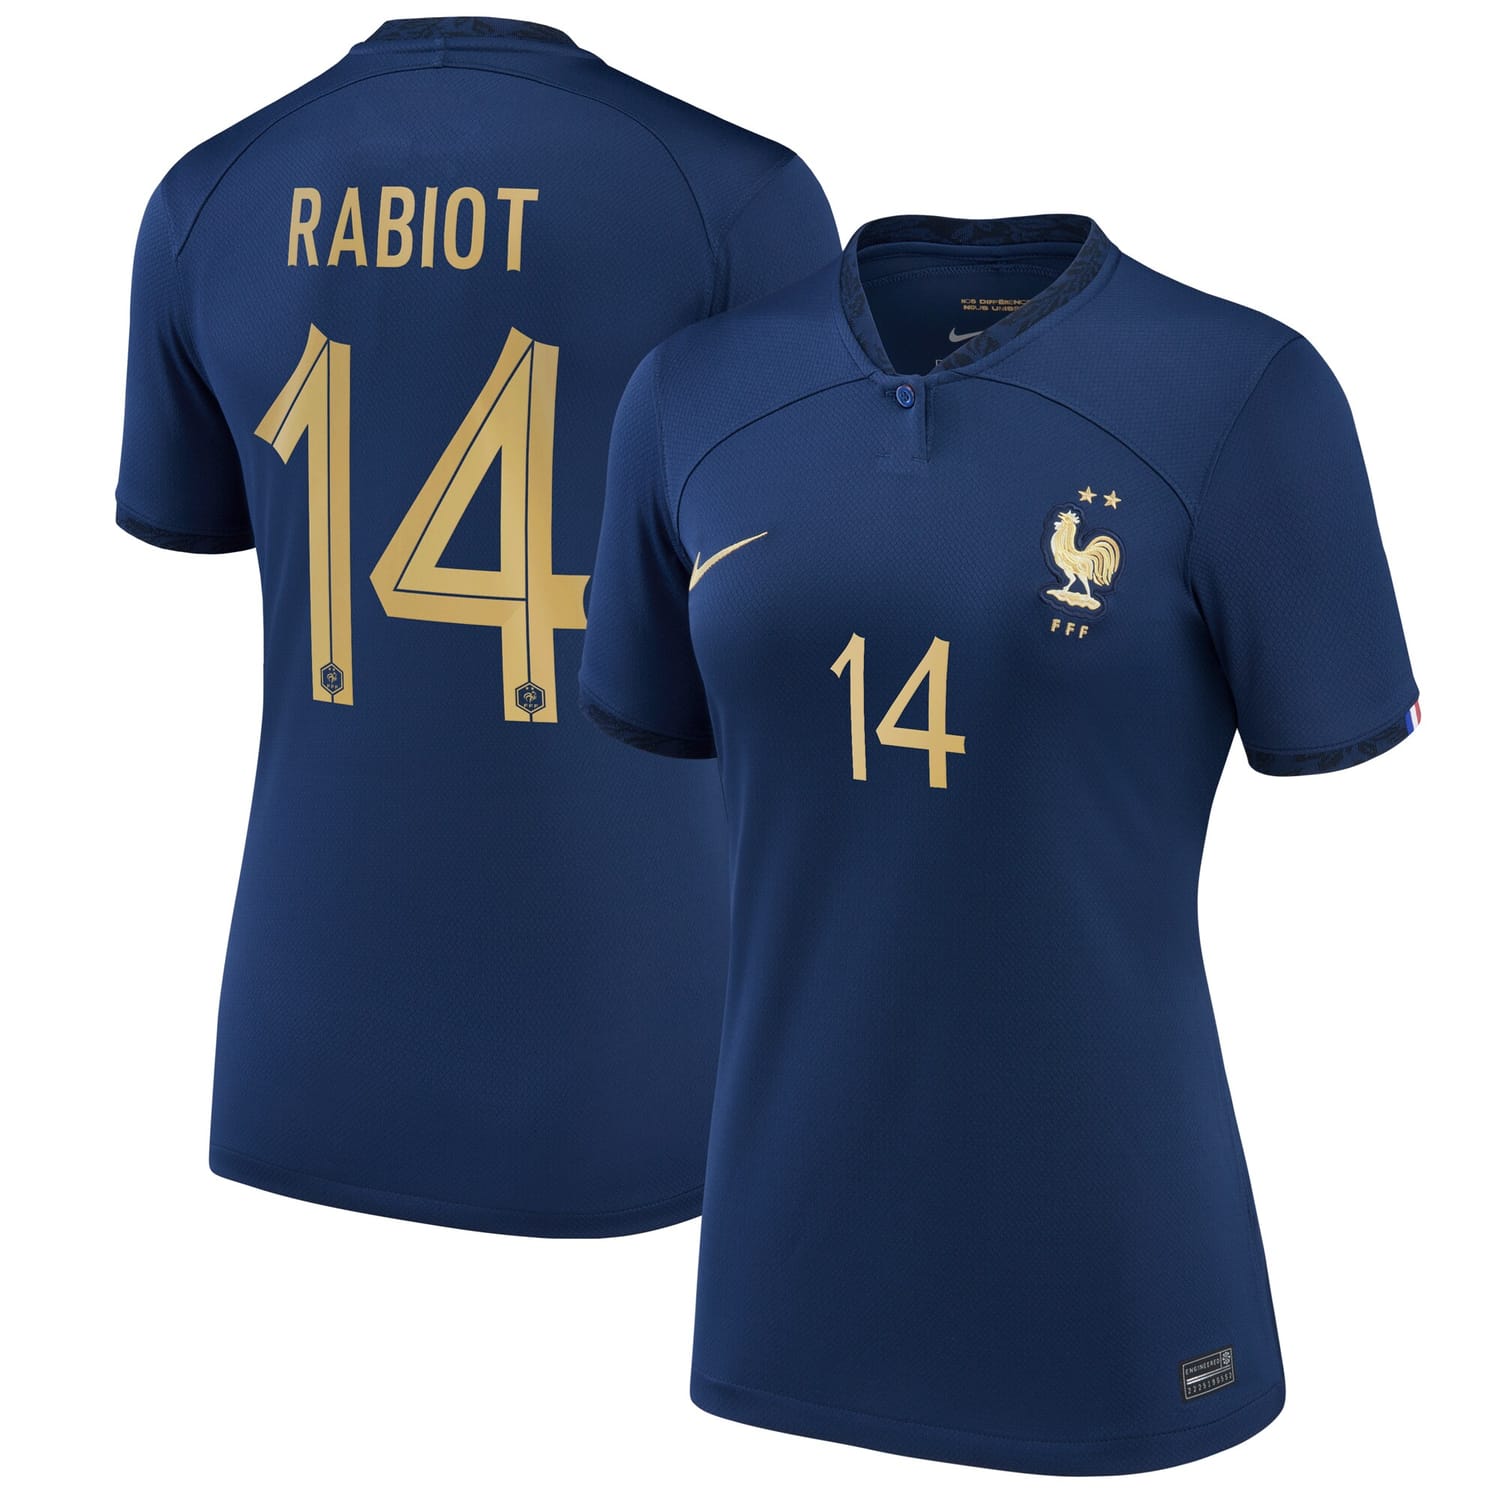 France National Team Home Jersey Shirt 2022 player Adrien Rabiot 14 printing for Women